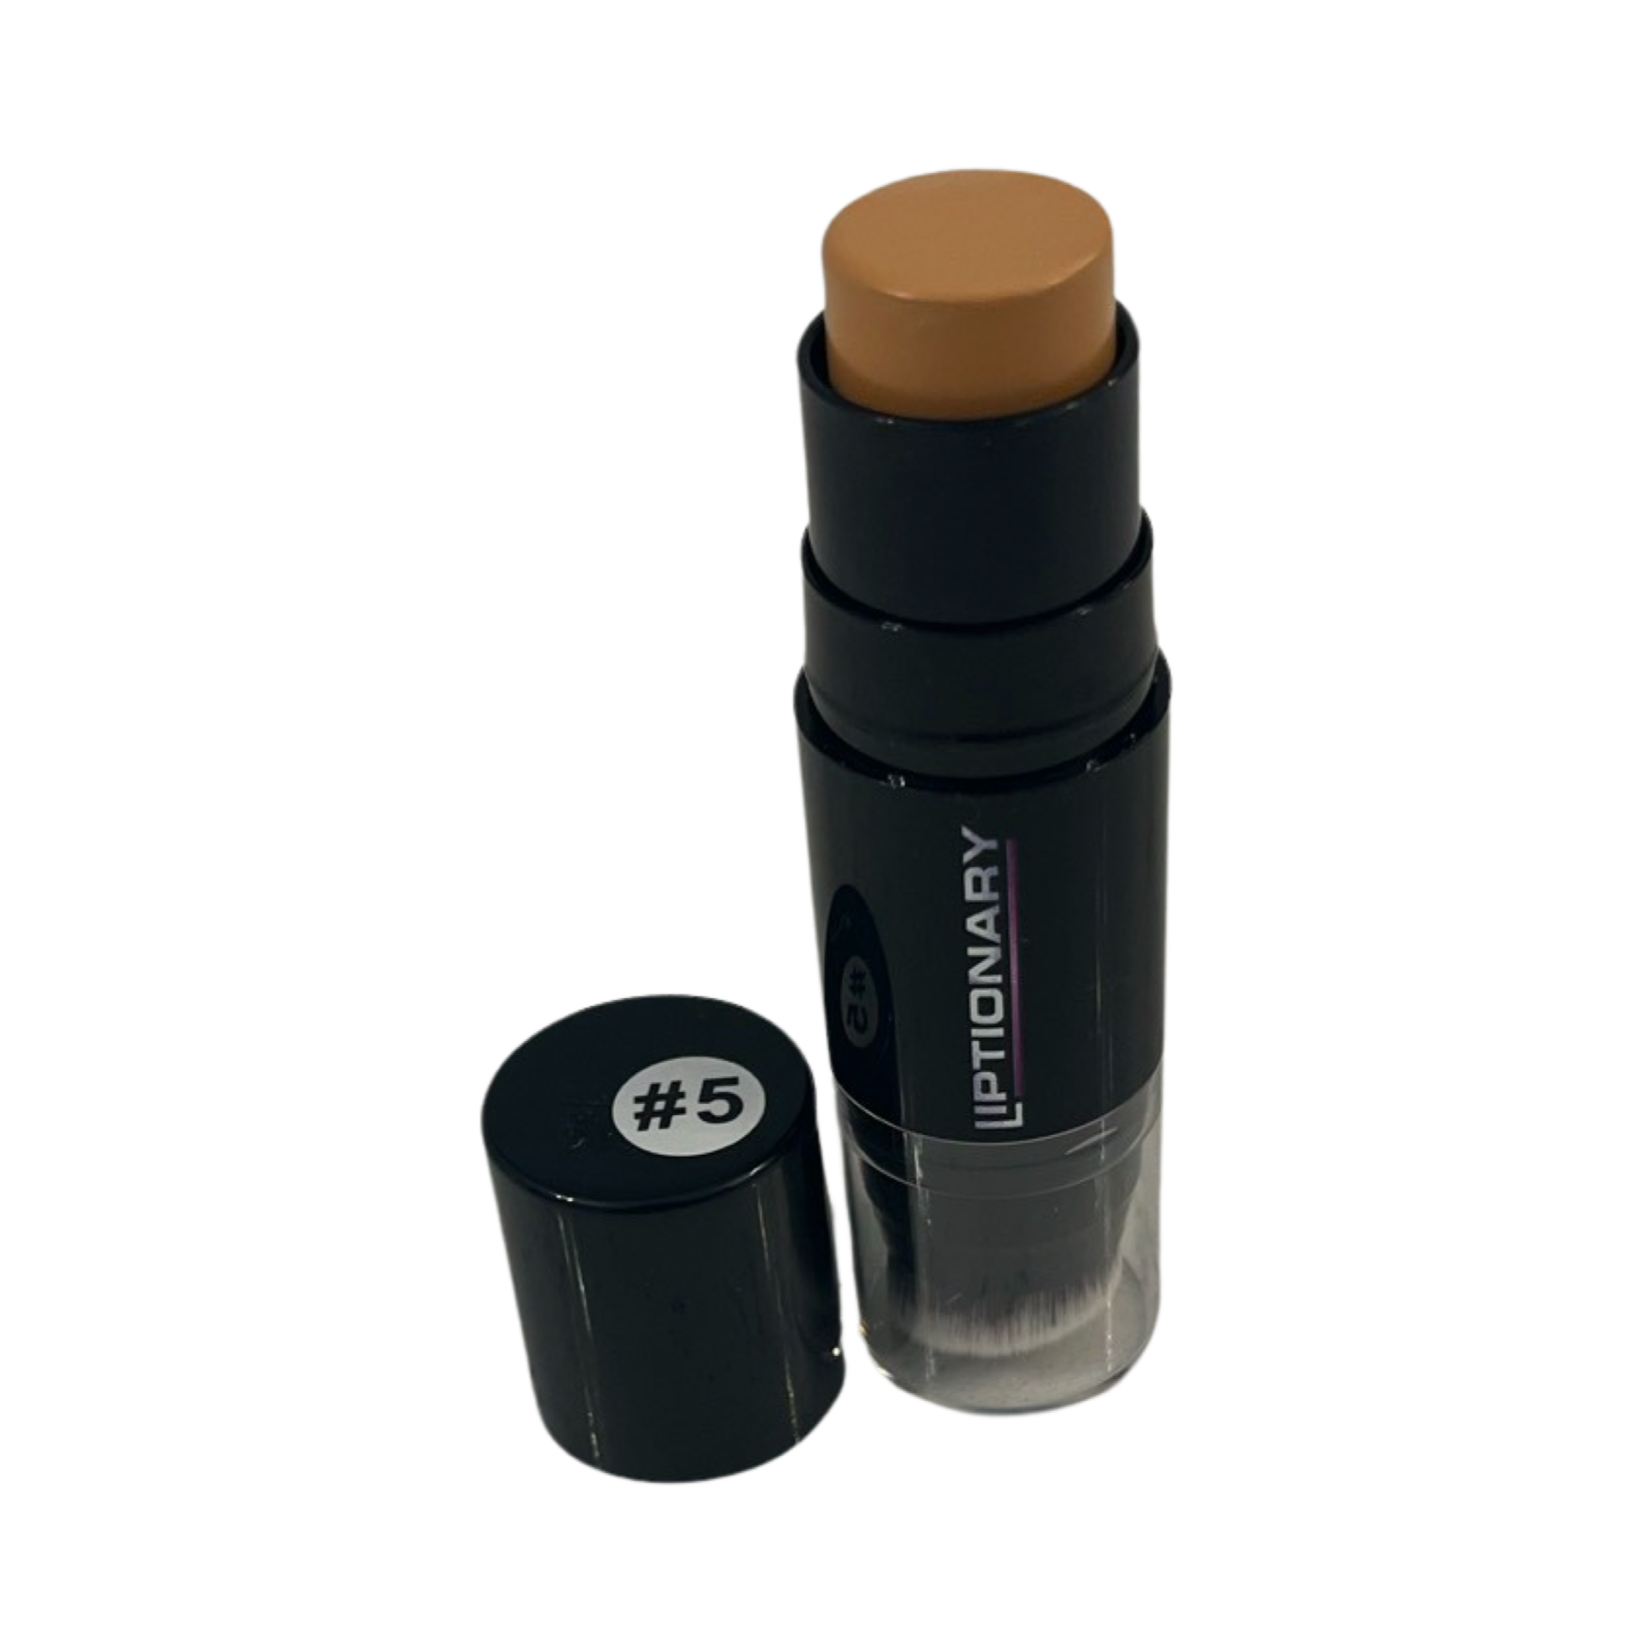 Liptionary 2 in 1 Contour Concealer Clay Stick